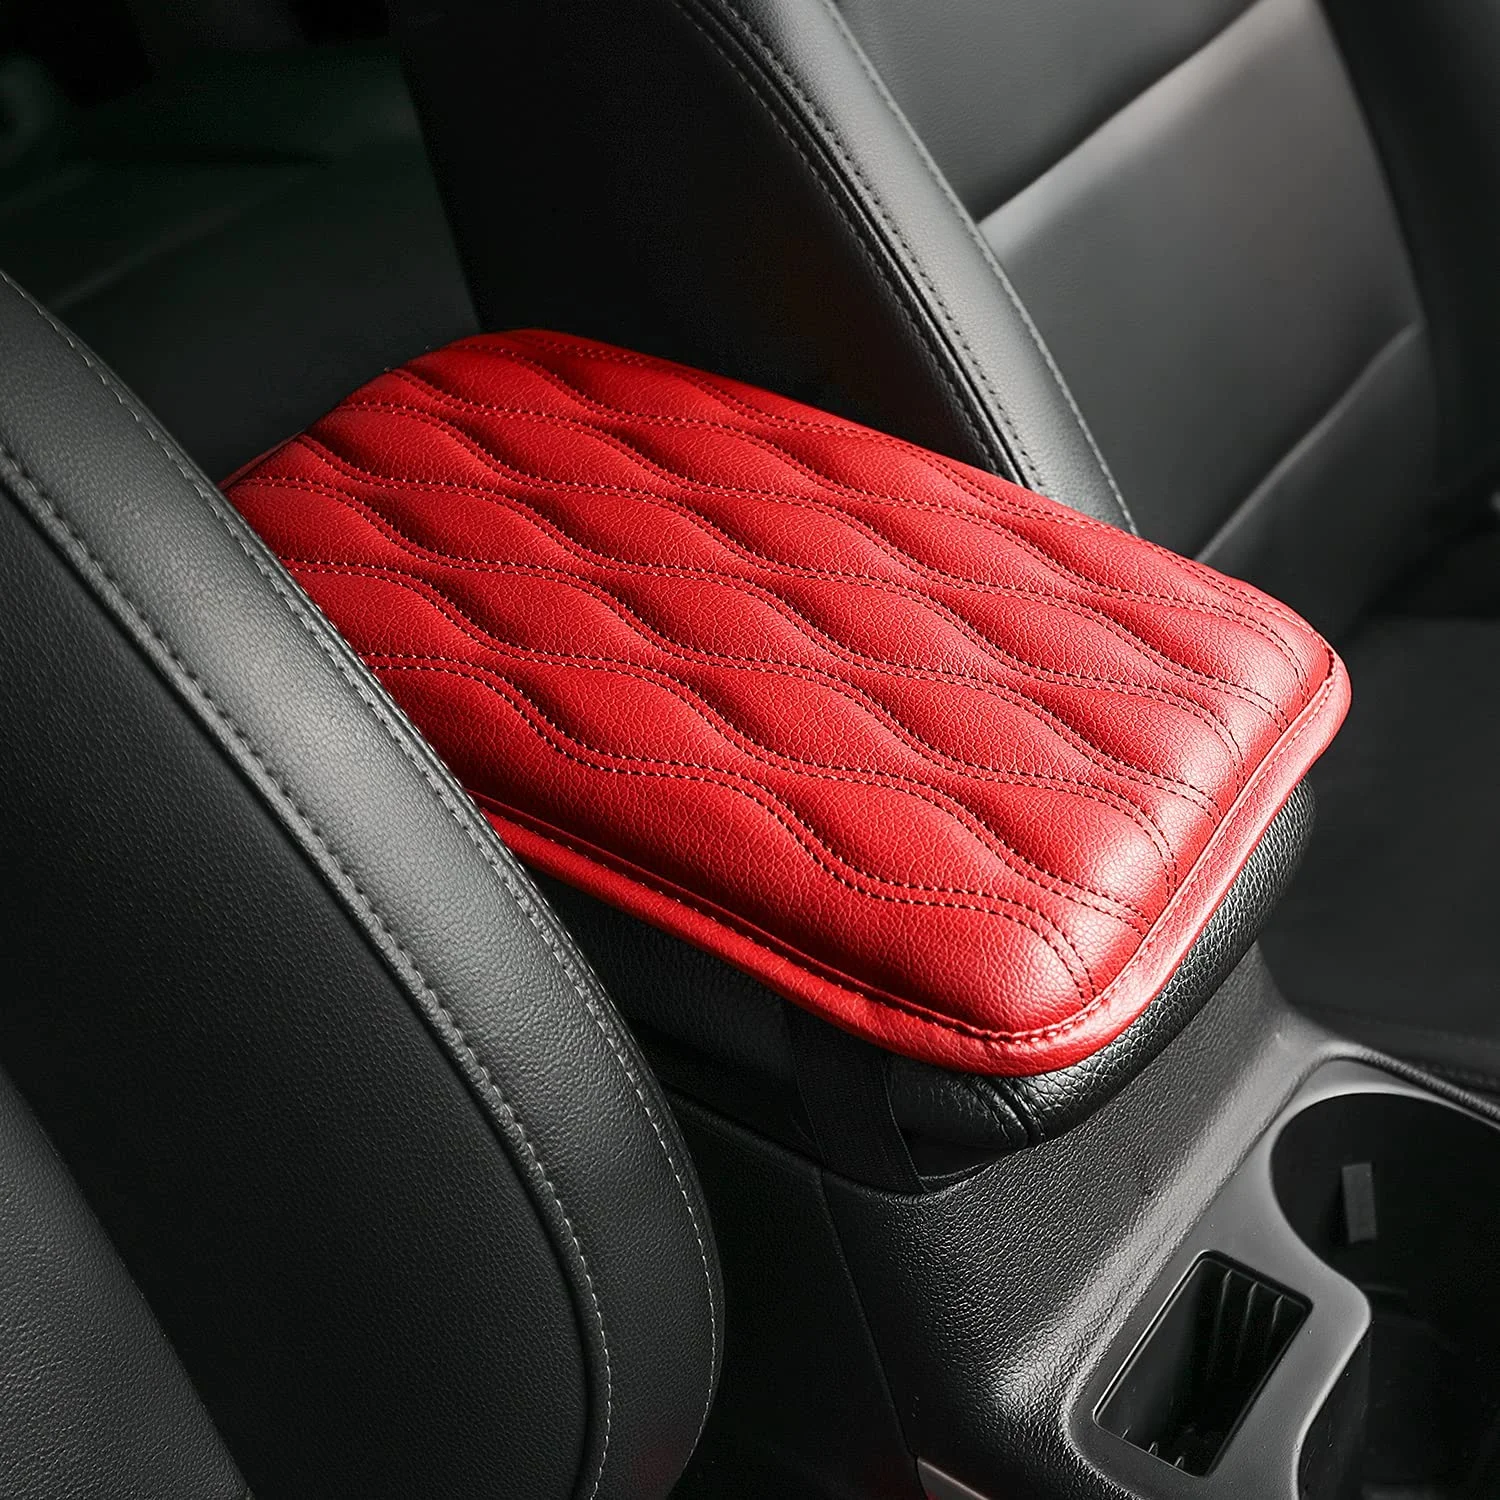 

Universal Car Central Armrest Box Soft Cover Center Console Cushion Microfiber Leather Arm Rest Pads ., Black red yello